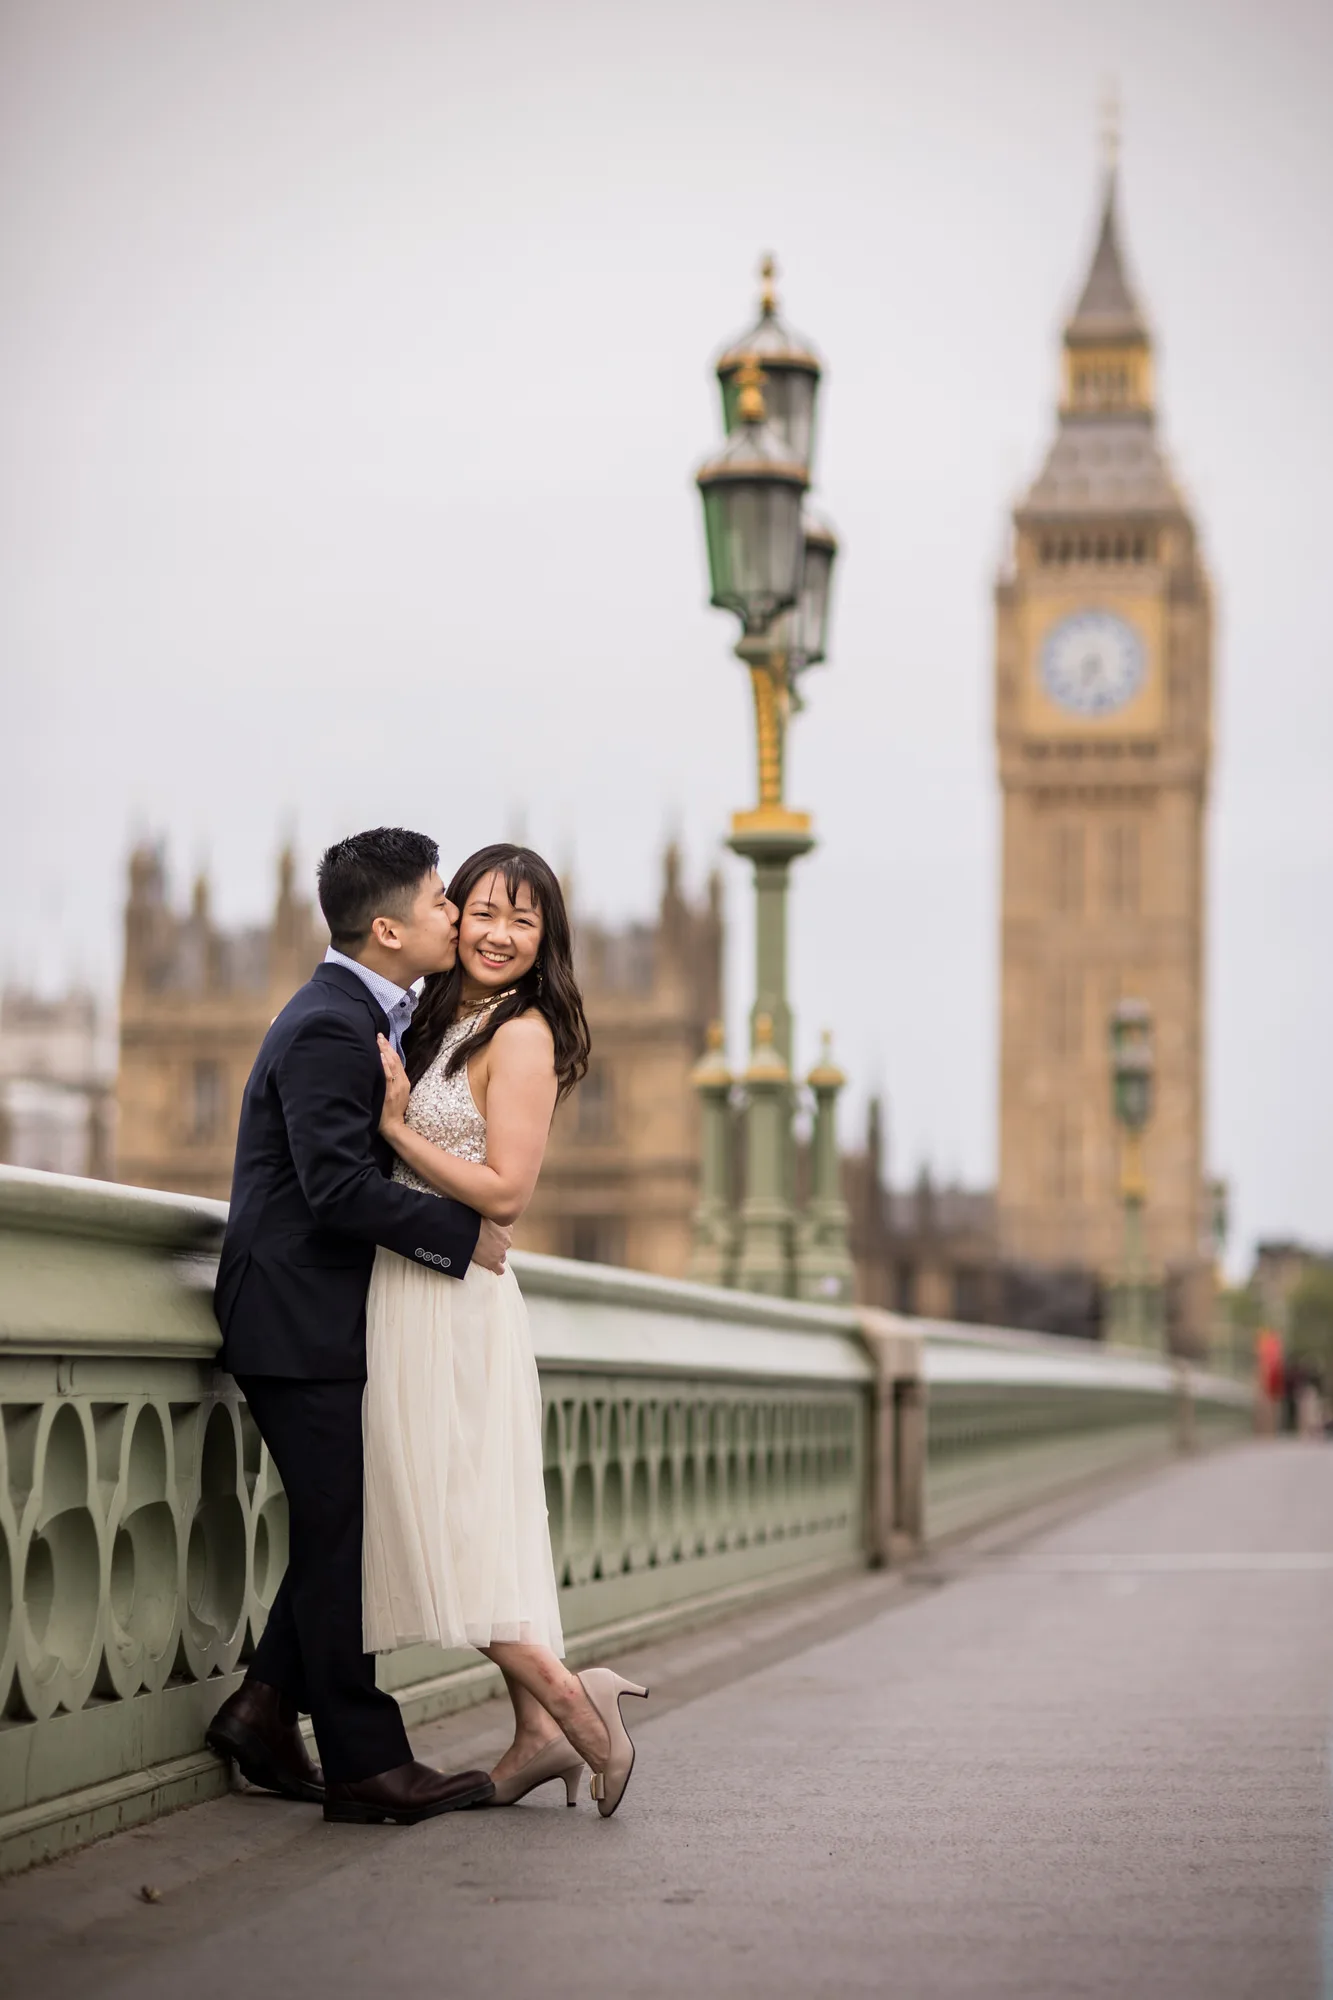 Reportage Wedding Photographer - a bride and groom enjoying their photo shoot on Westminster Bridge with the houses of Parliament in the background in London.